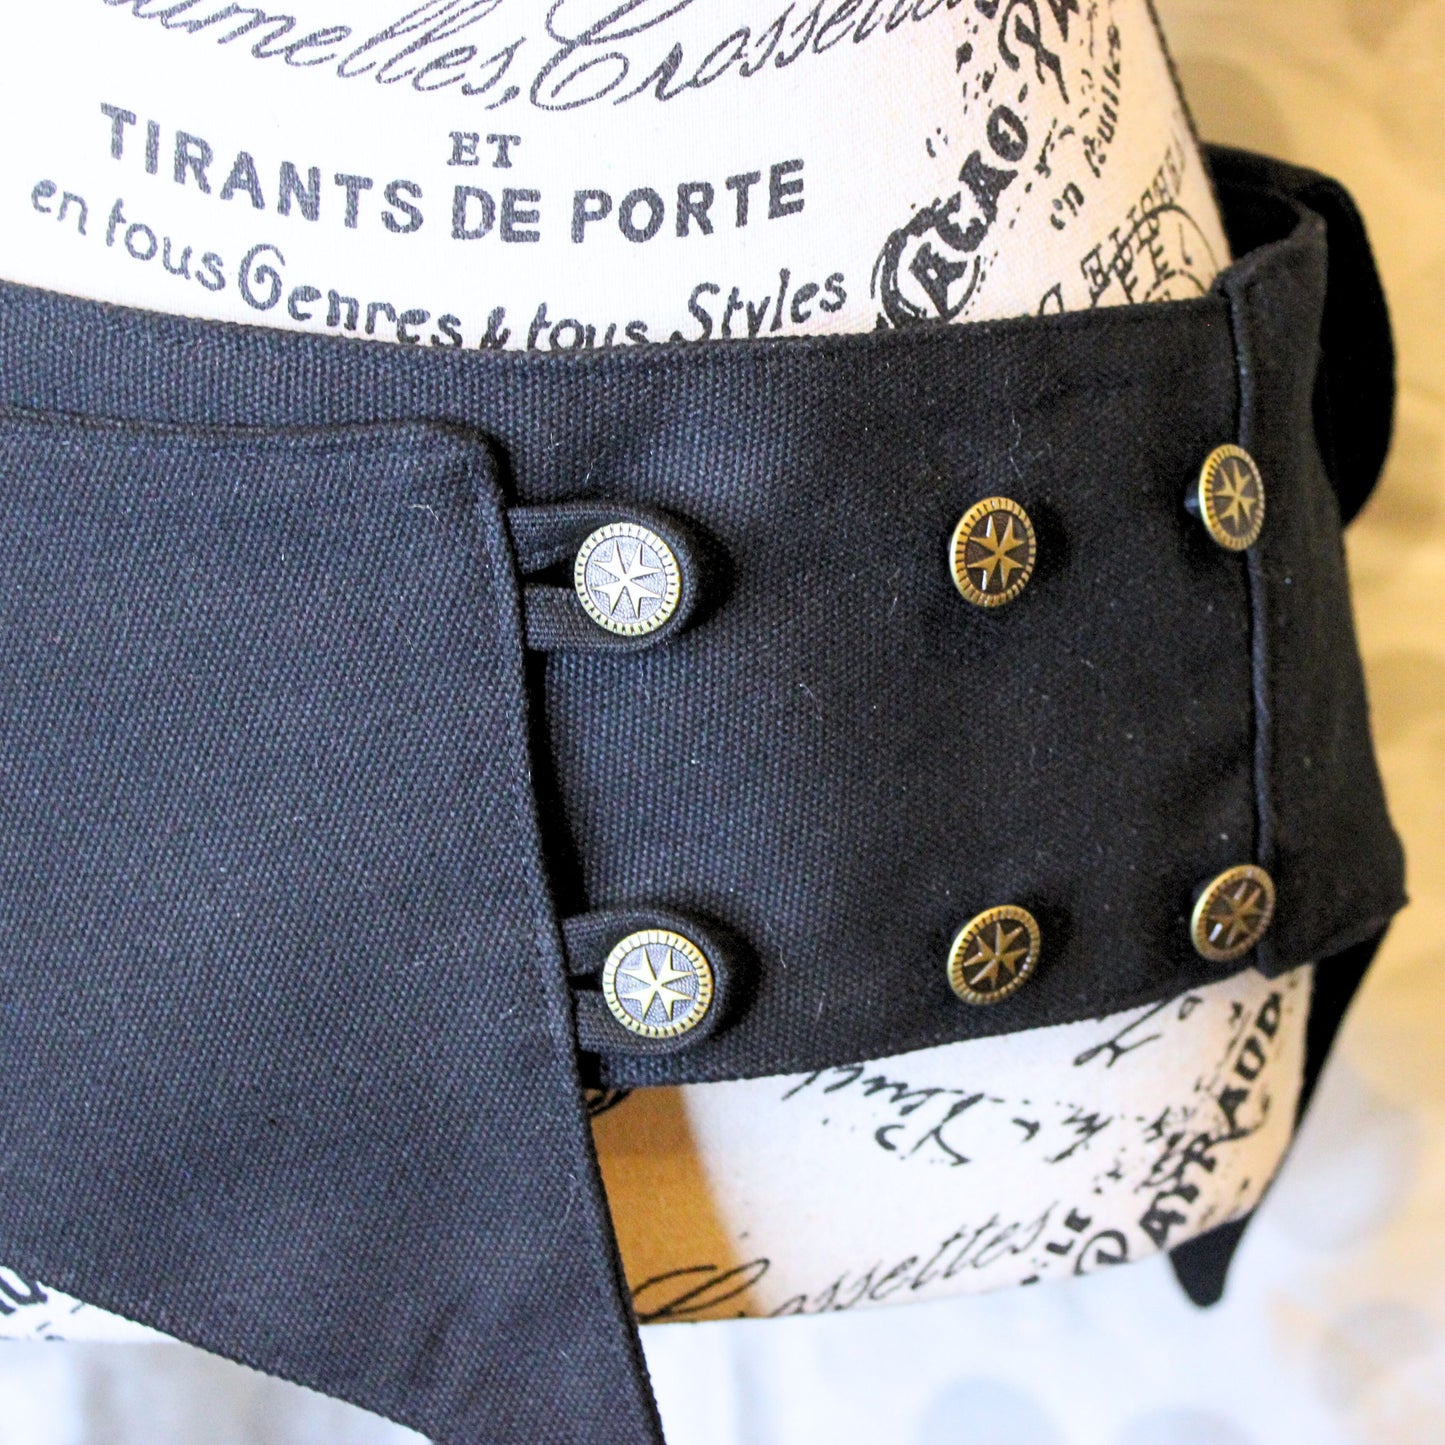 The VM Multi Point Pocket Belt (with Button Closure)